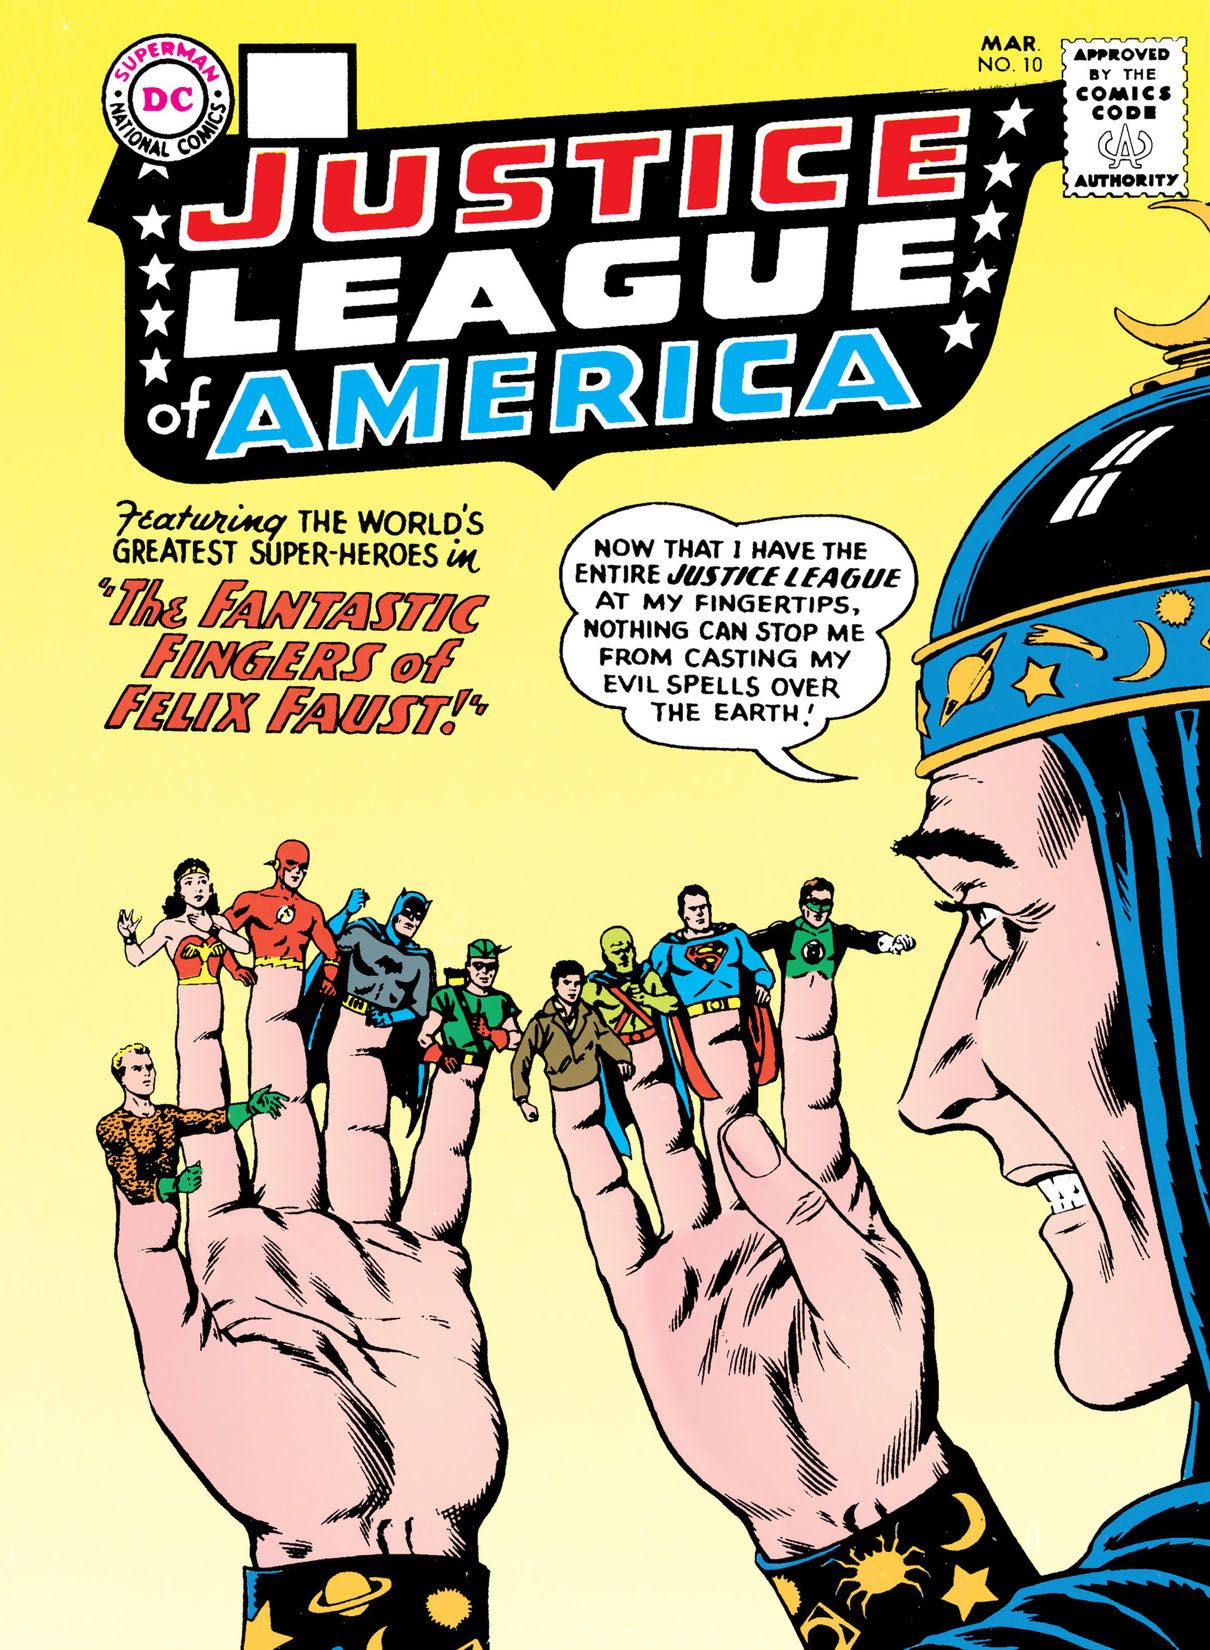 The cover of Justice League of America #10